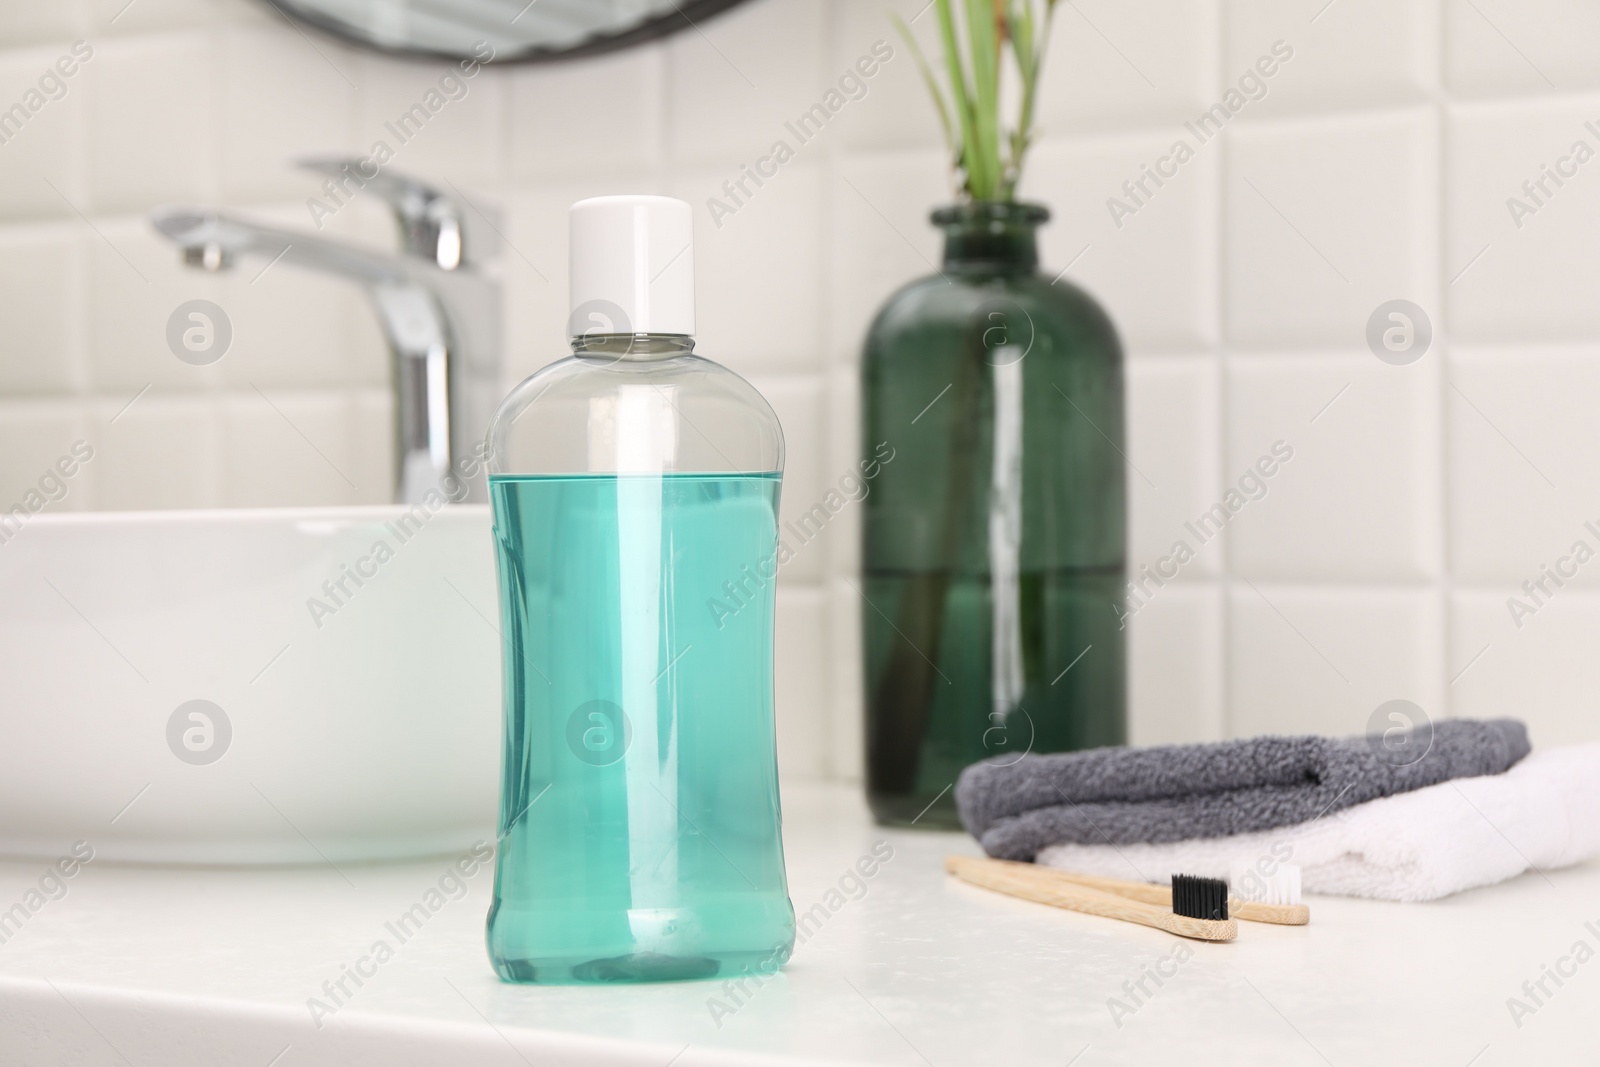 Photo of Bottle of mouthwash on white table in bathroom